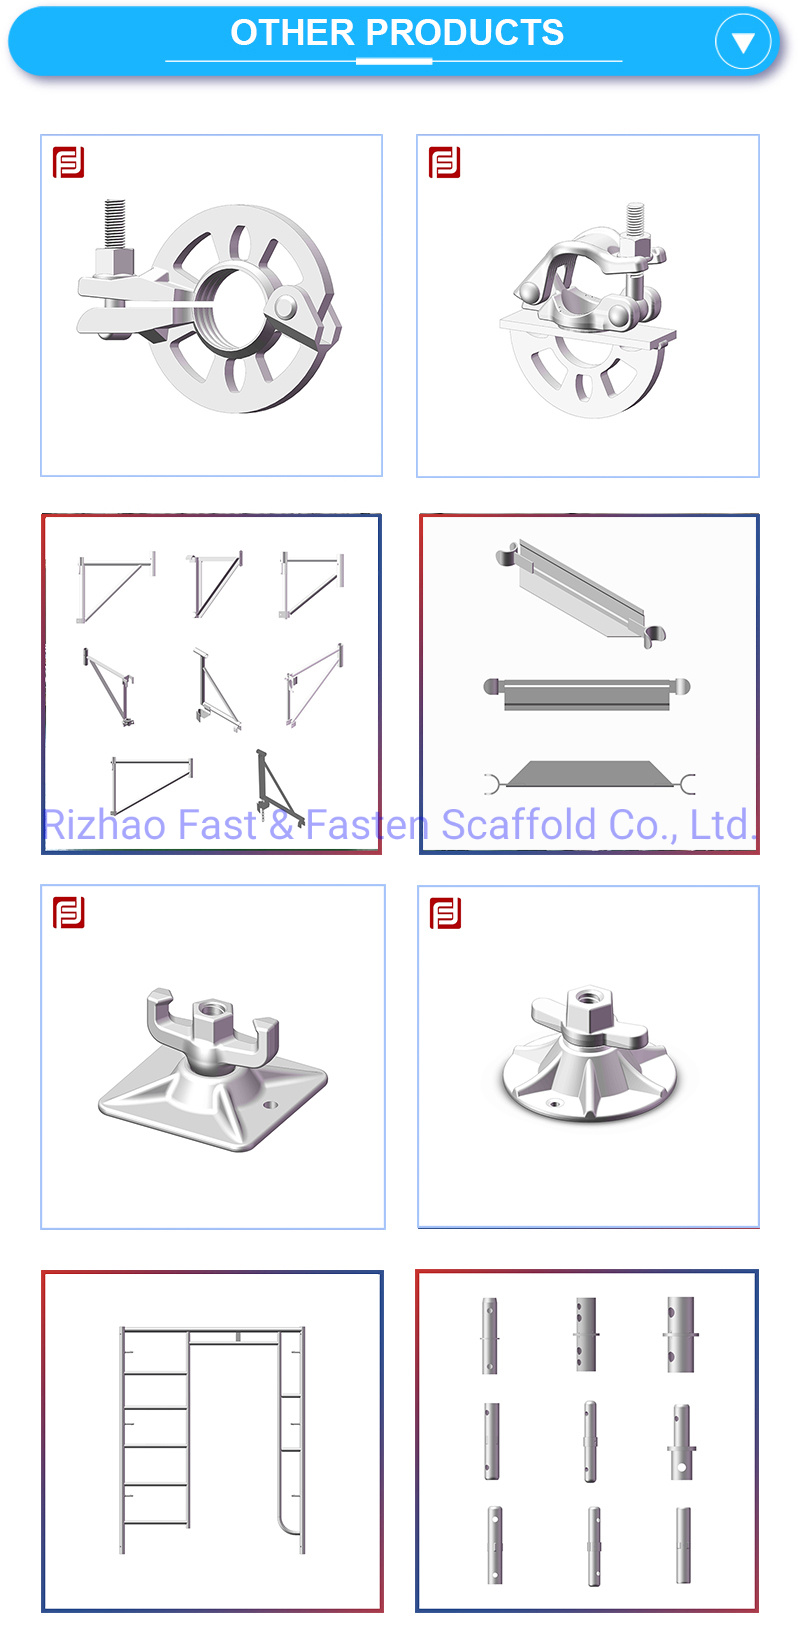 OEM Scaffold Adjustable Screws Jack with Base Plate Made in China